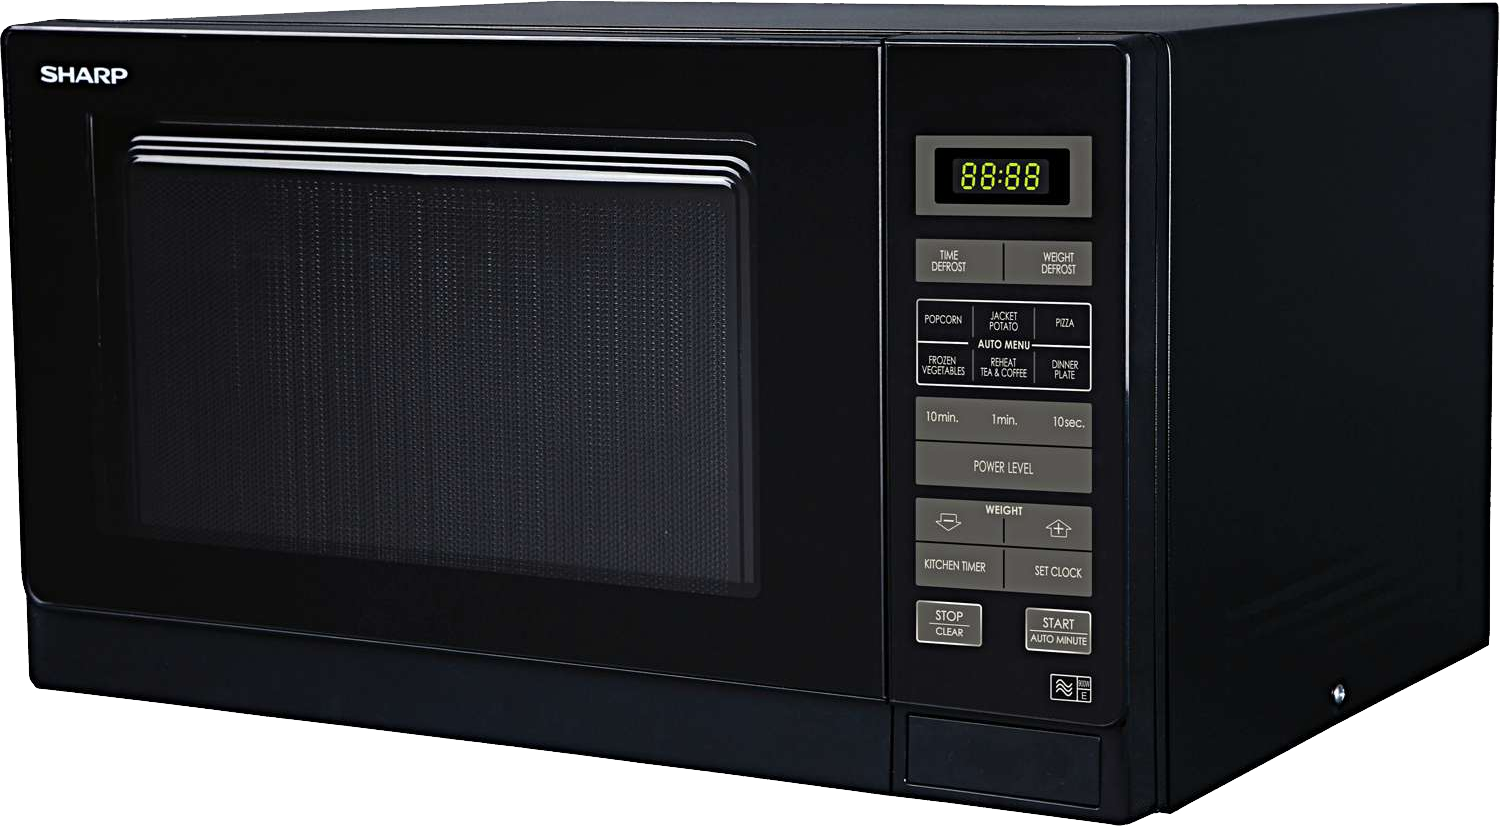 Sharp Black Oven Microwave HD Image Free PNG Image